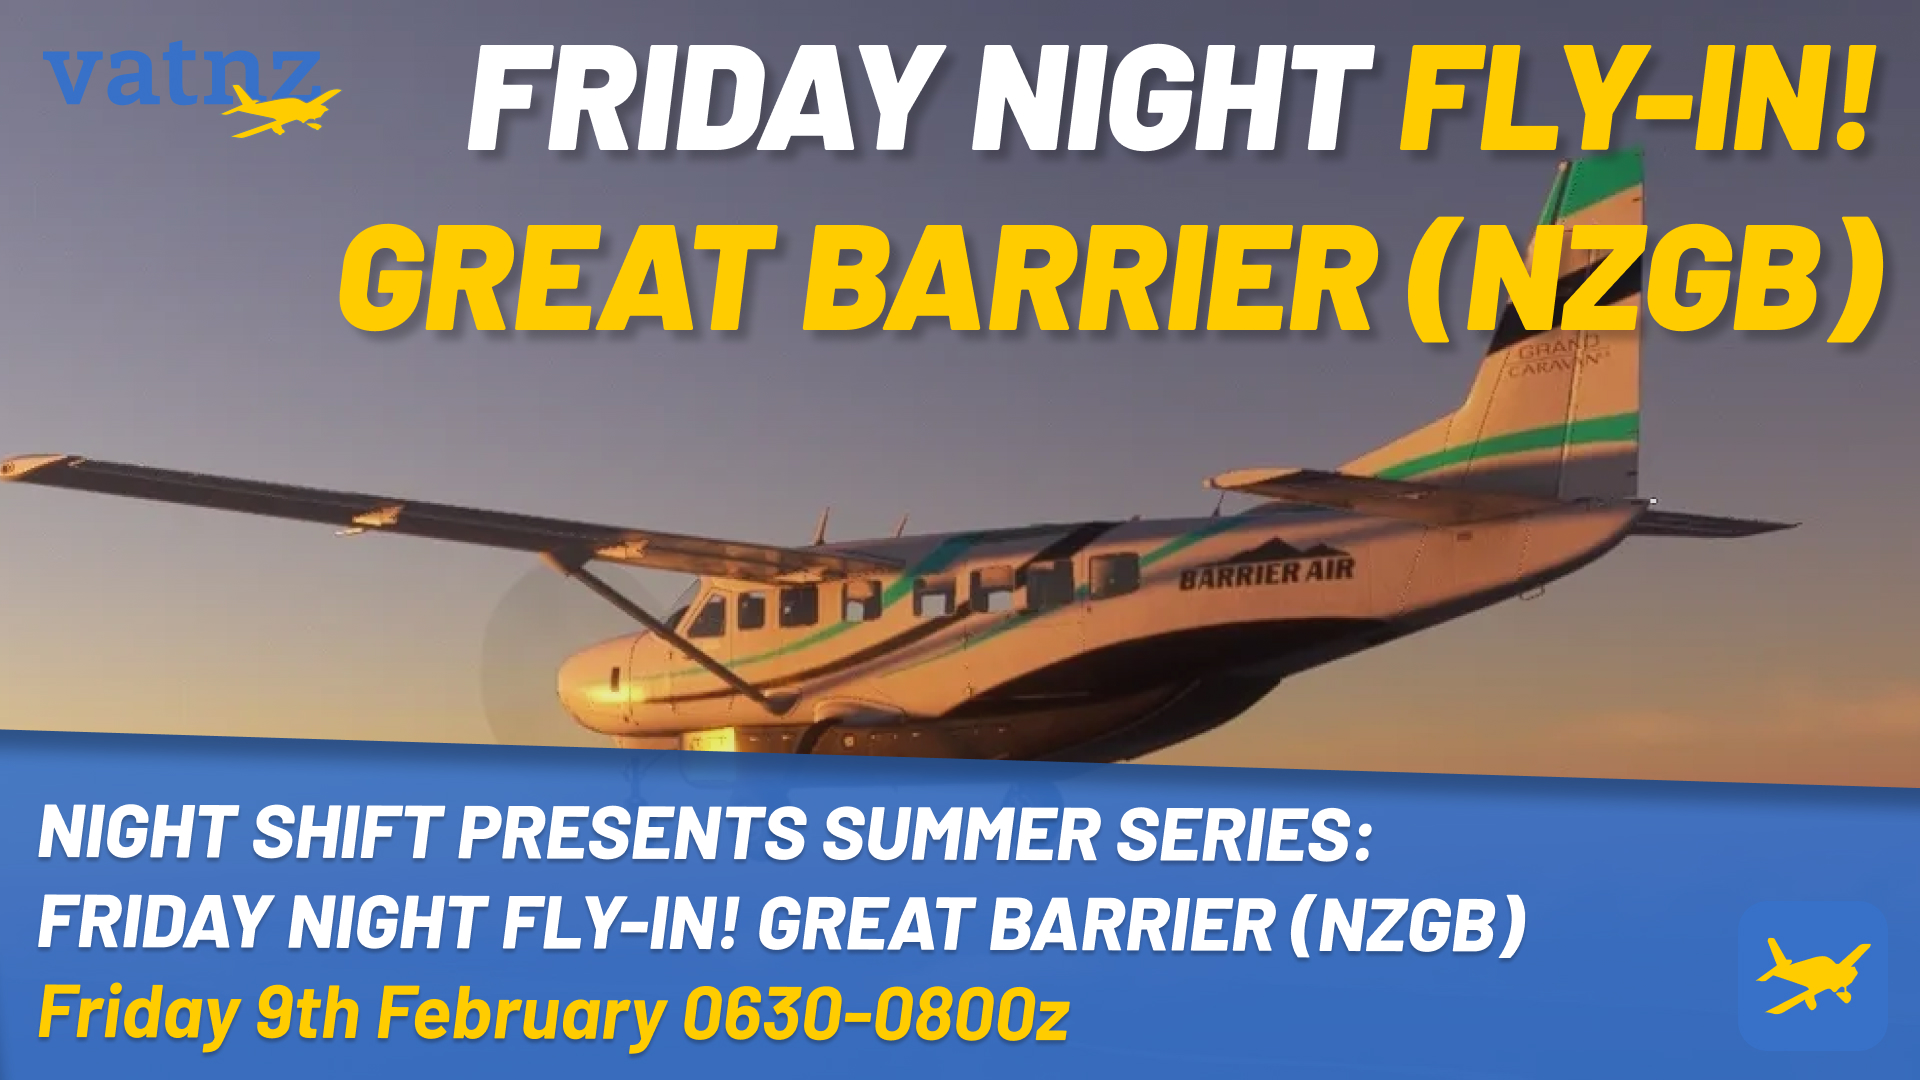 Summer Series Presents: Friday Night Fly-in! Great Barrier